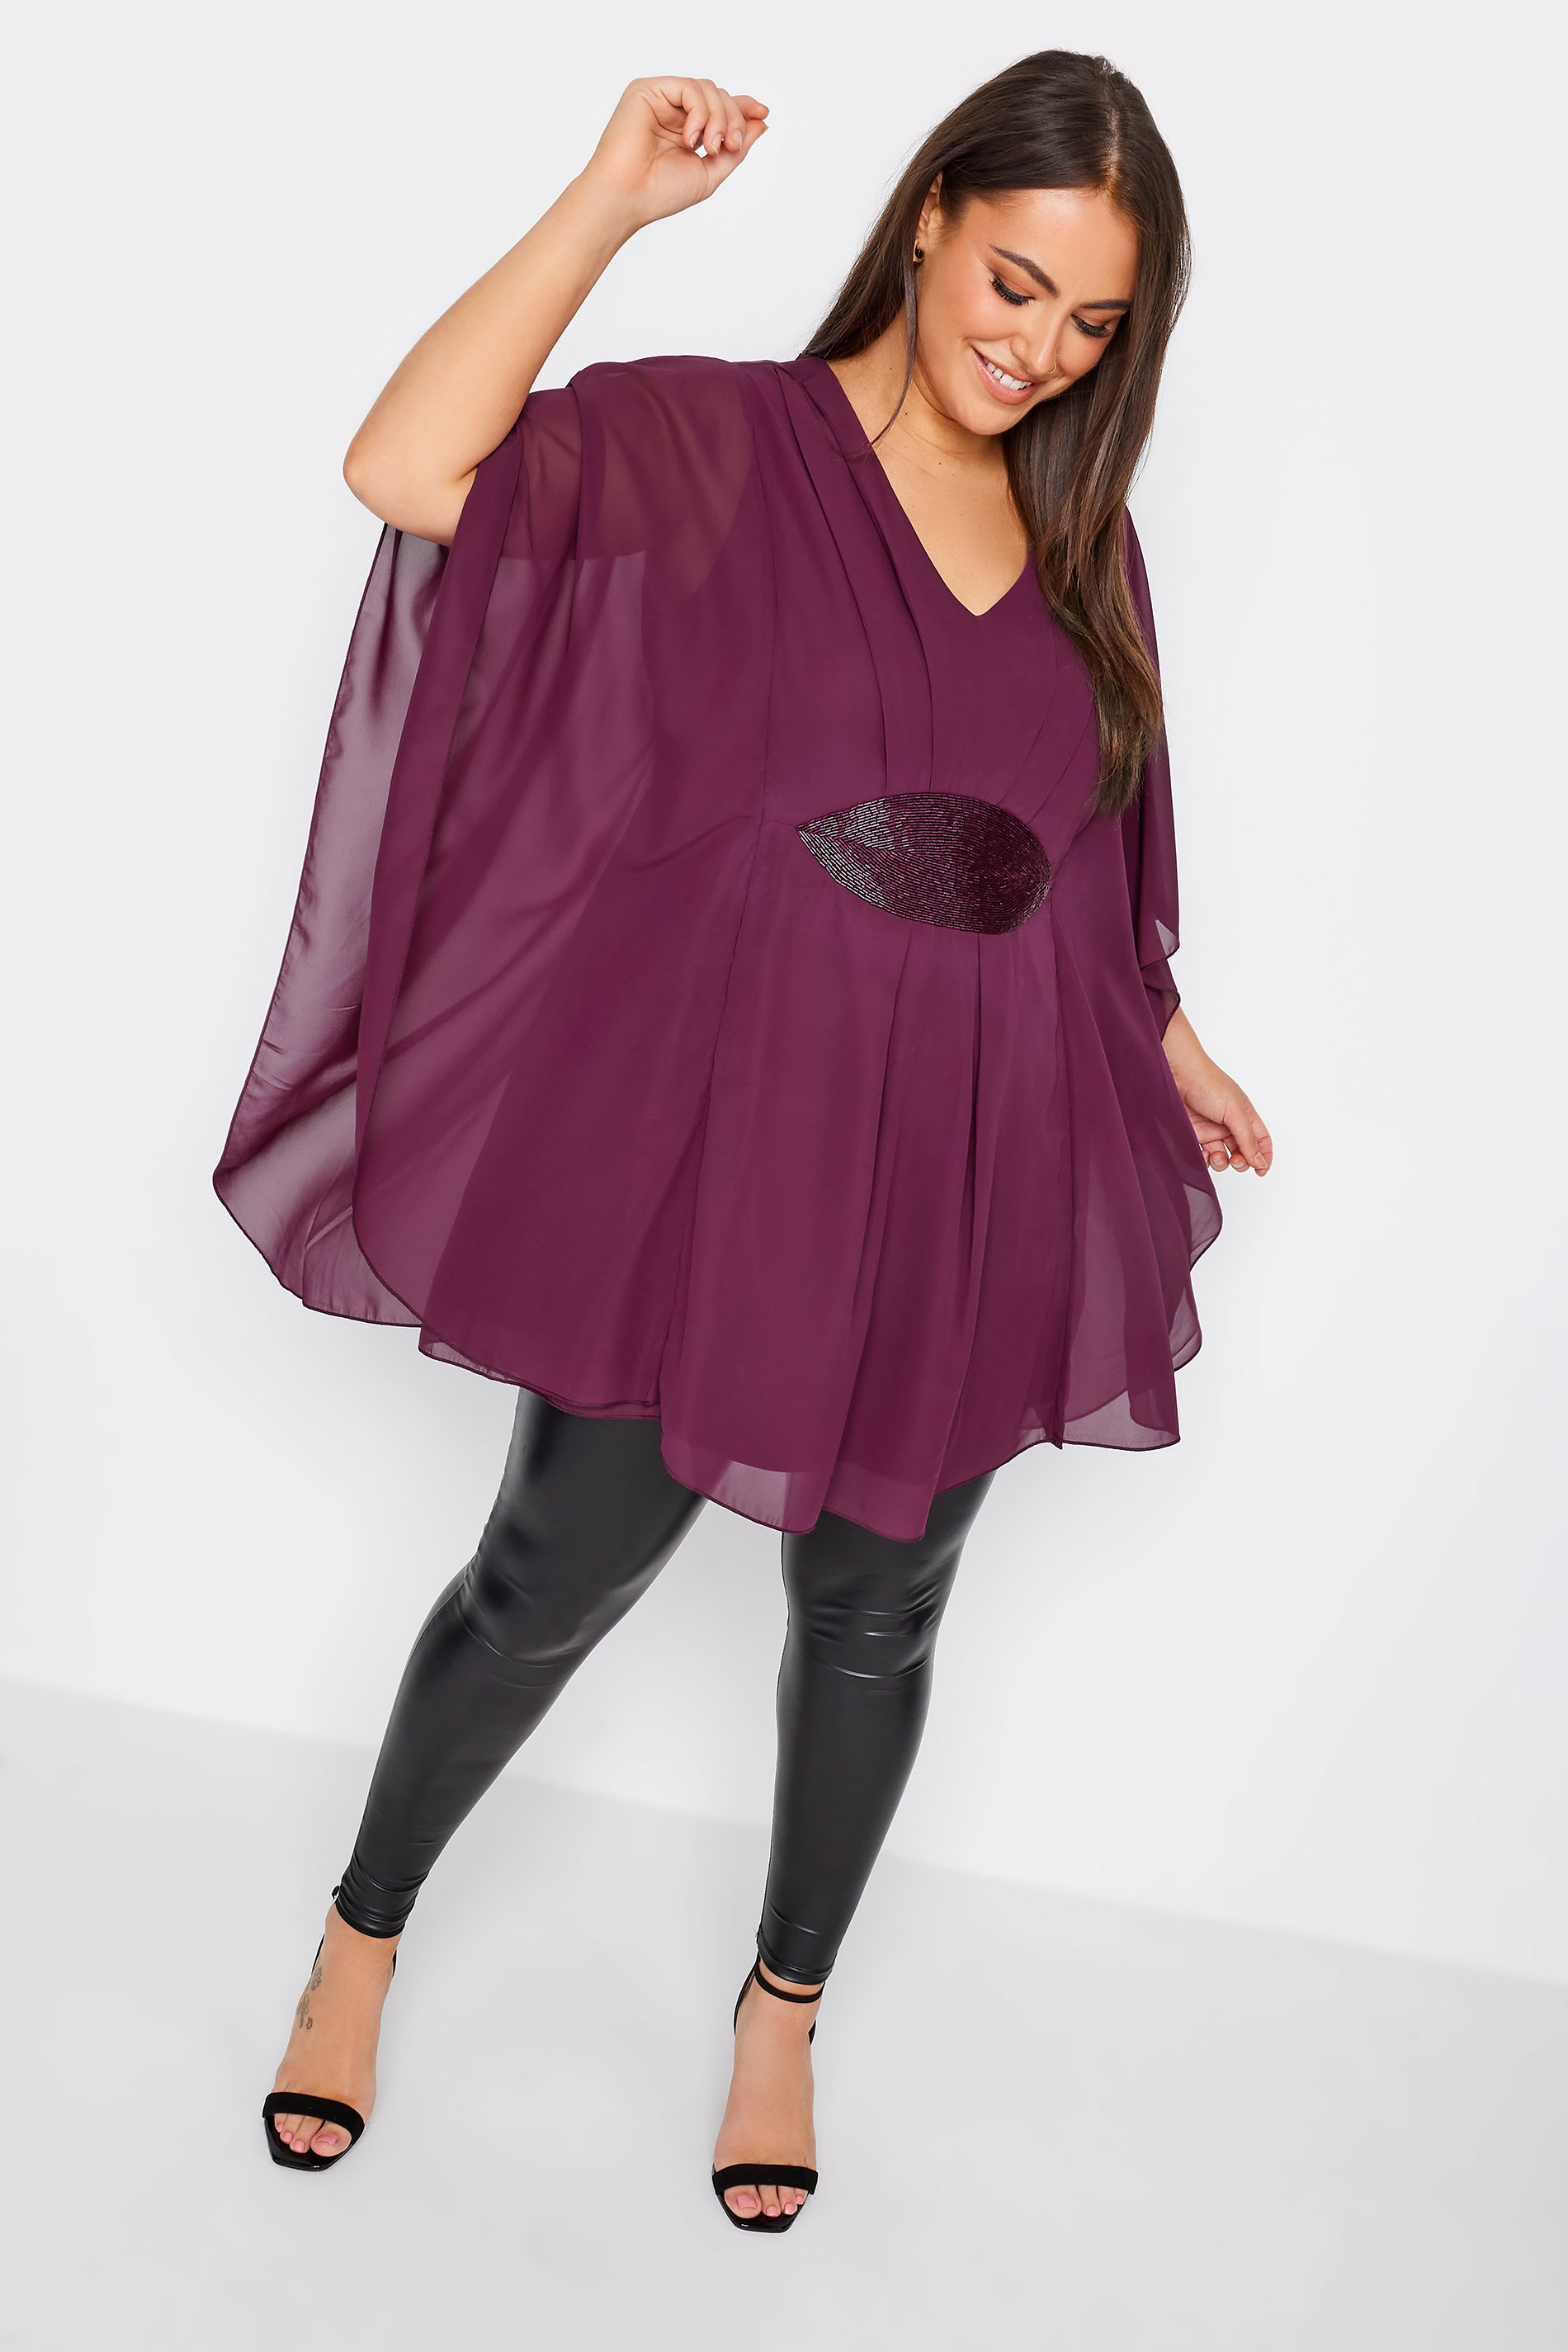 LUXE Plus Size Purple Hand Embellished Waist Cape Top | Yours Clothing 2